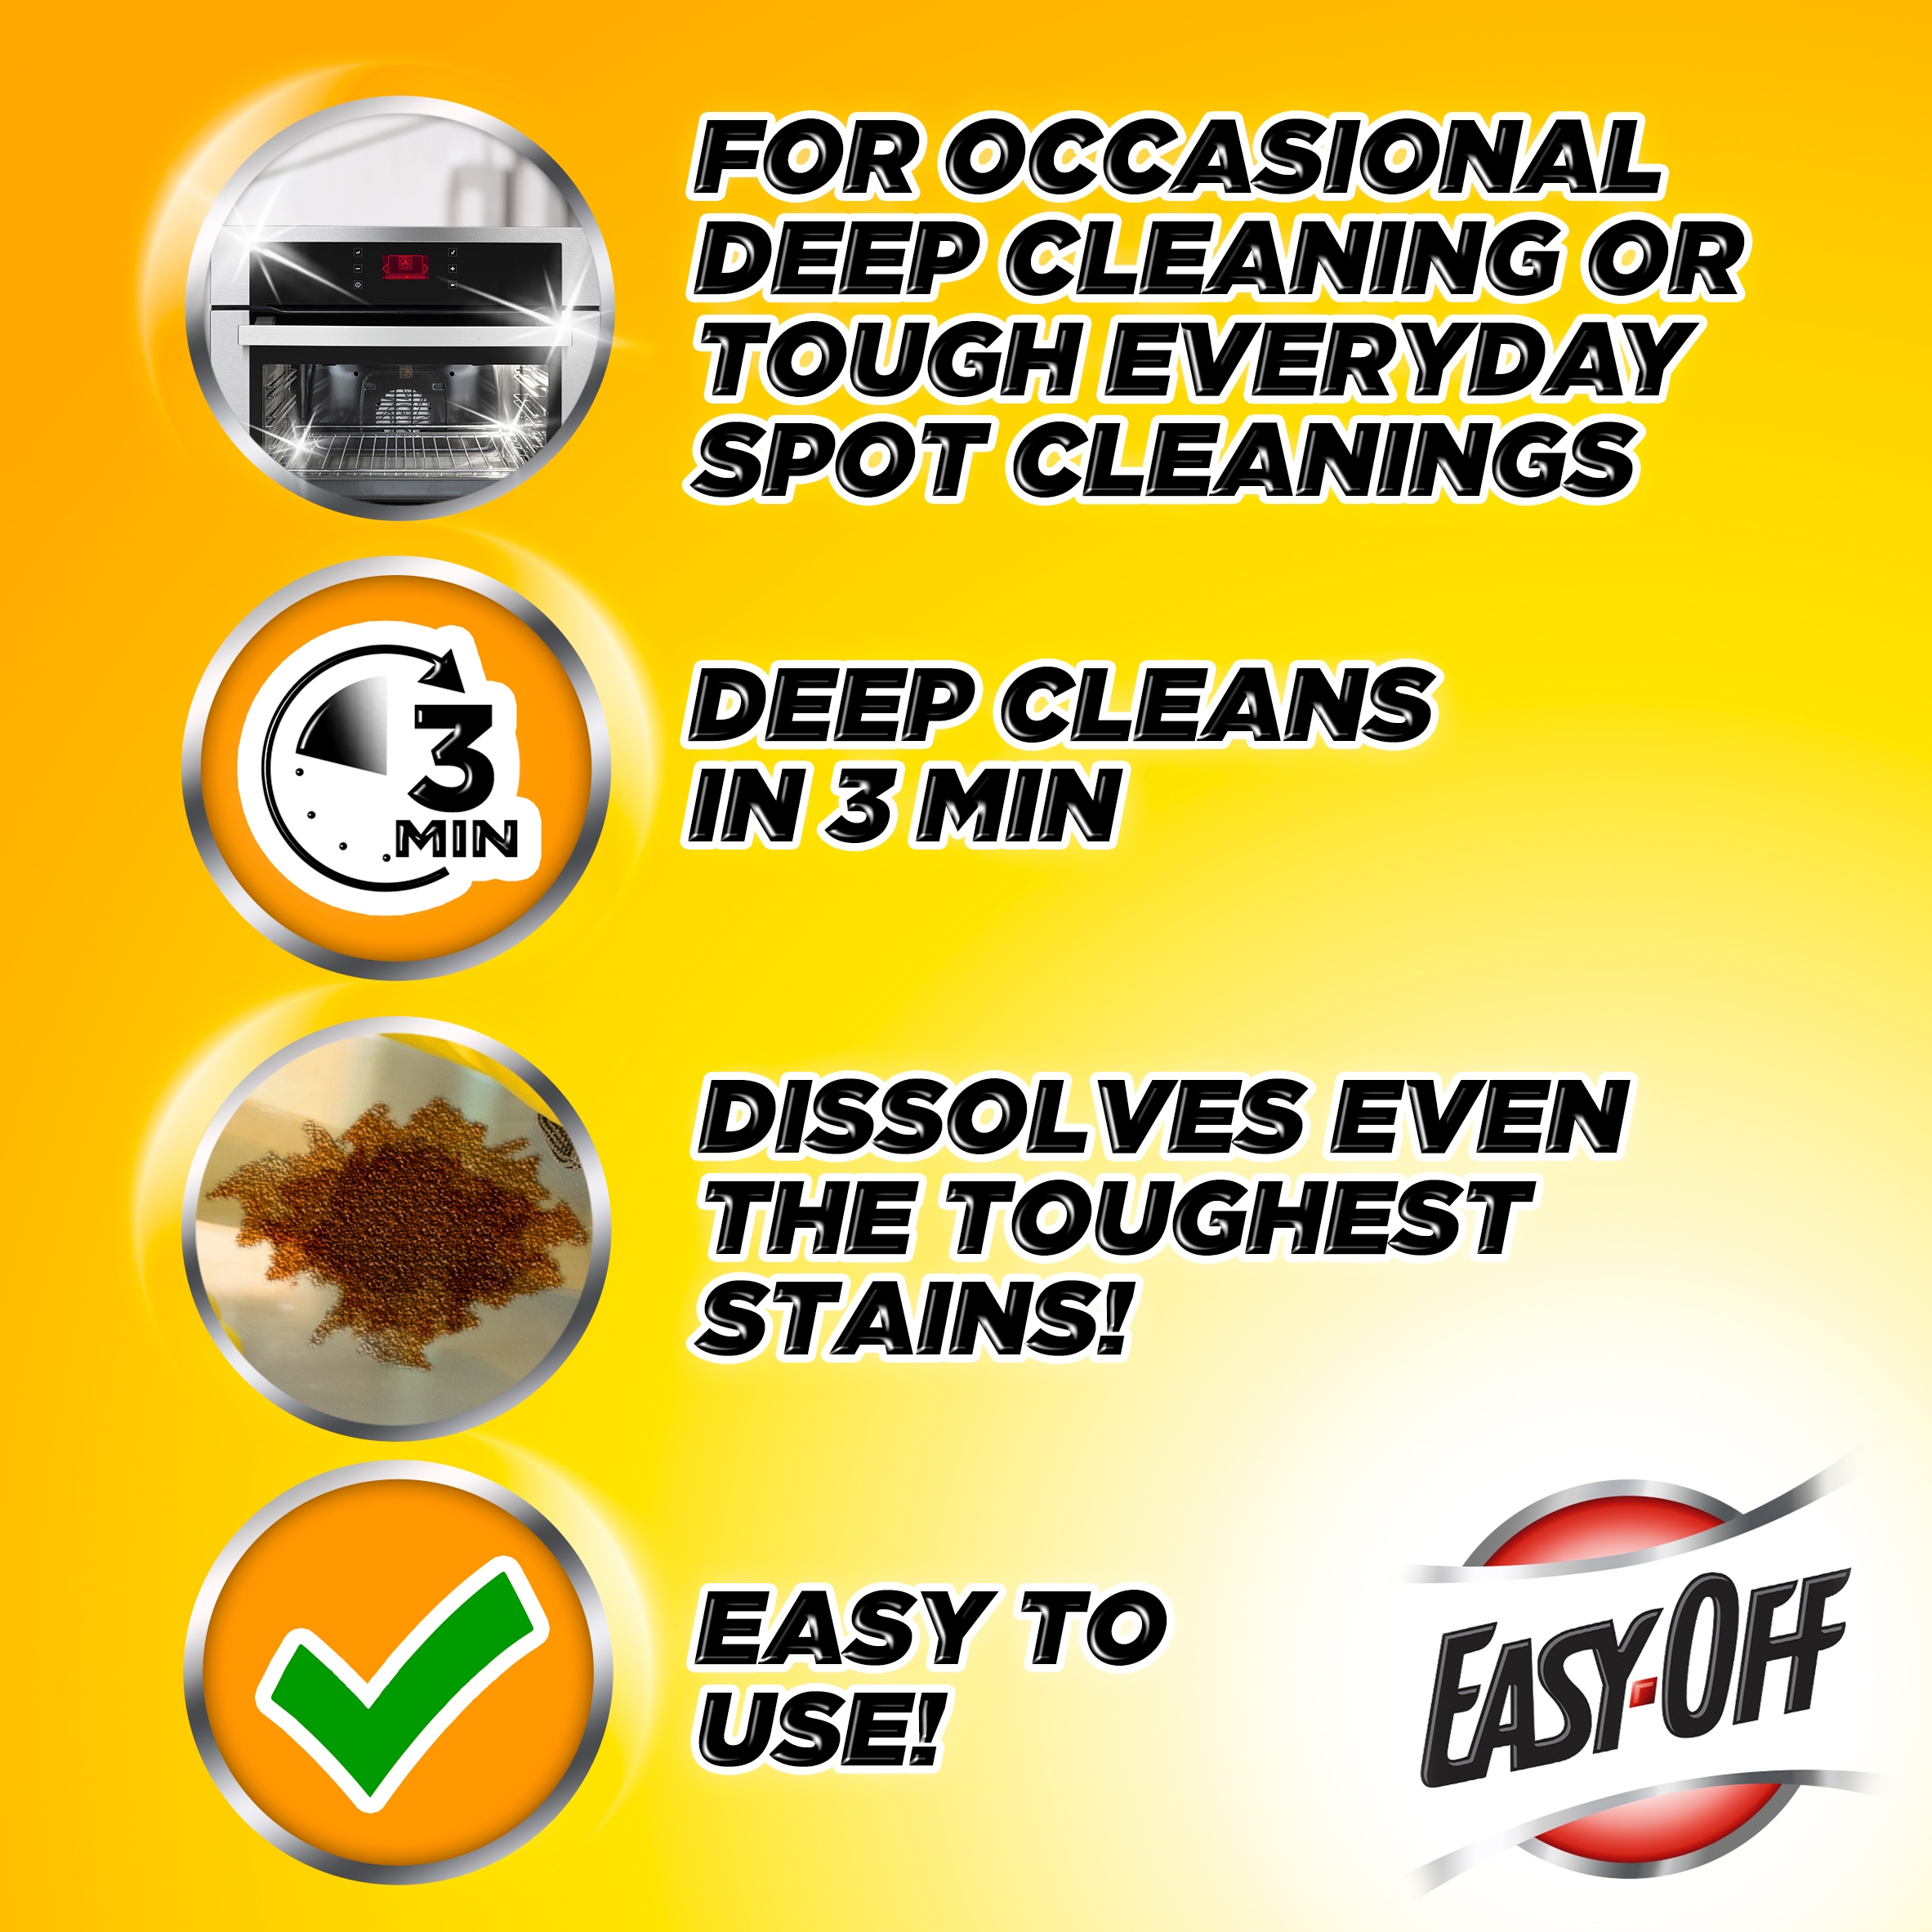 Easy-Off Oven & Grill Cleaner, Pro, Heavy Duty - 24 oz